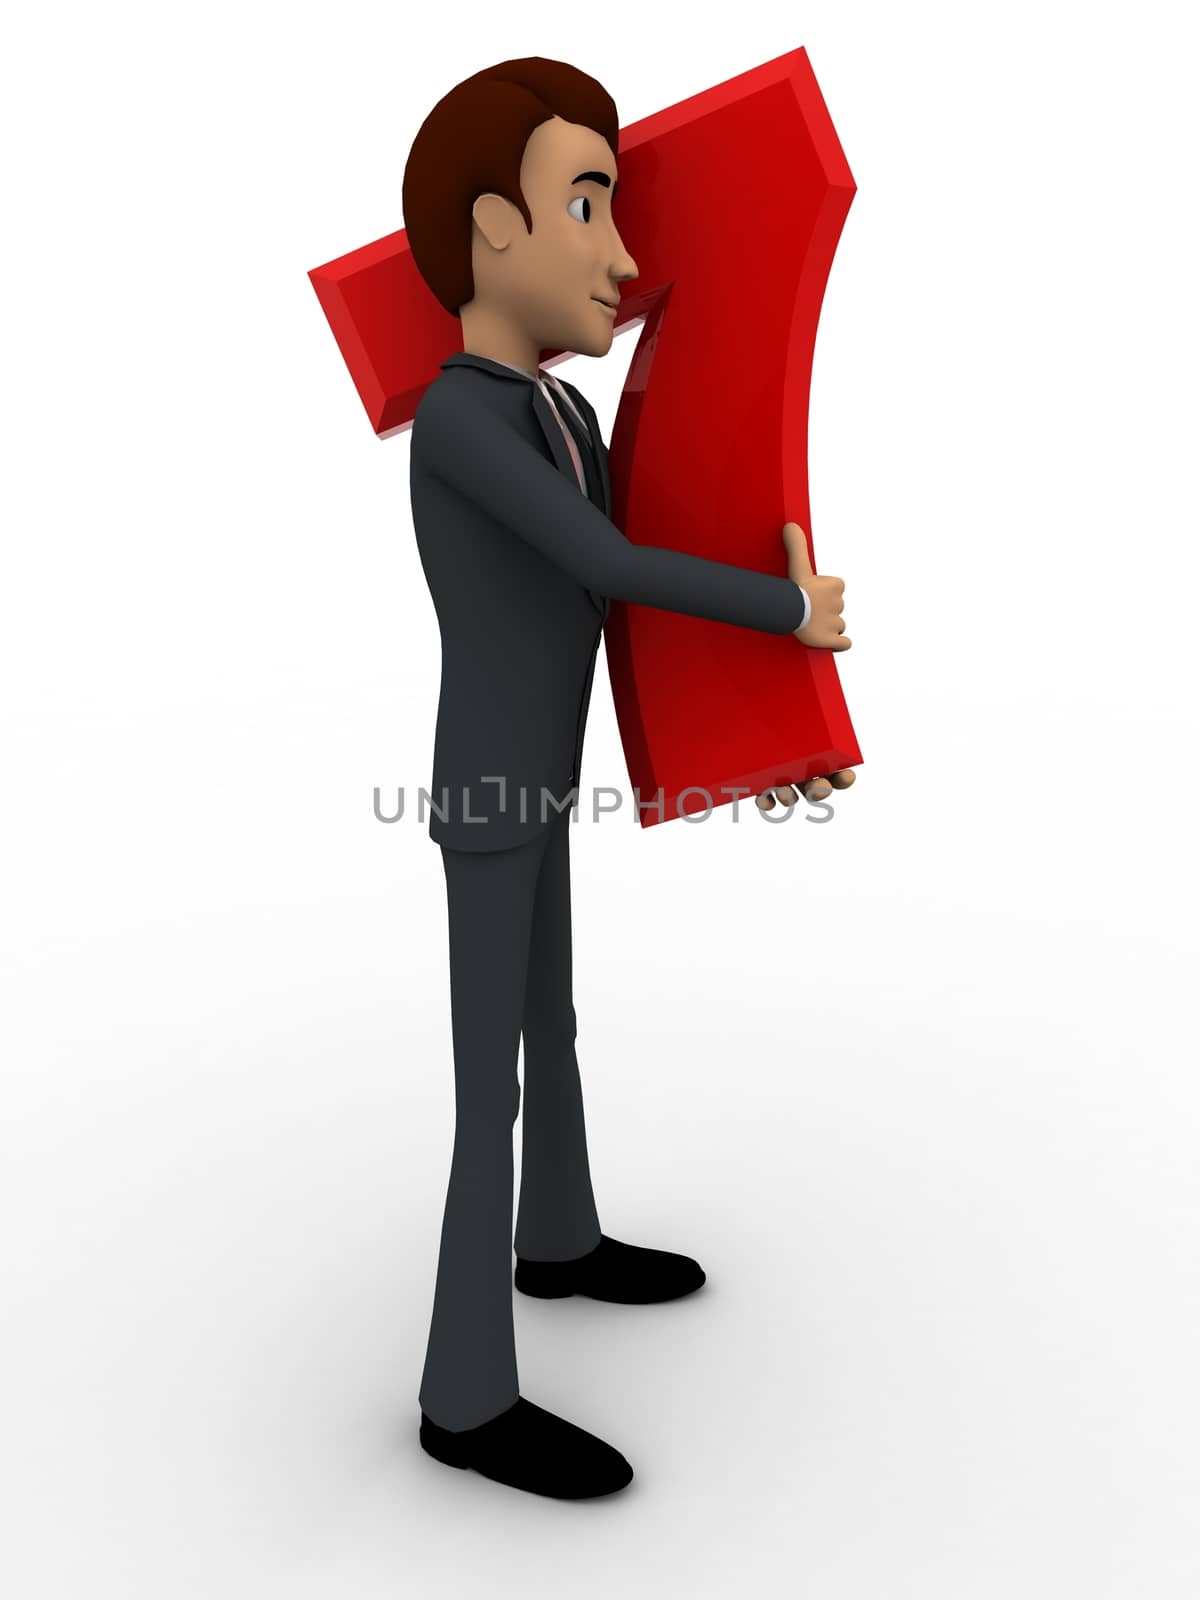 3d man holding 7 number on shoulder concept by touchmenithin@gmail.com